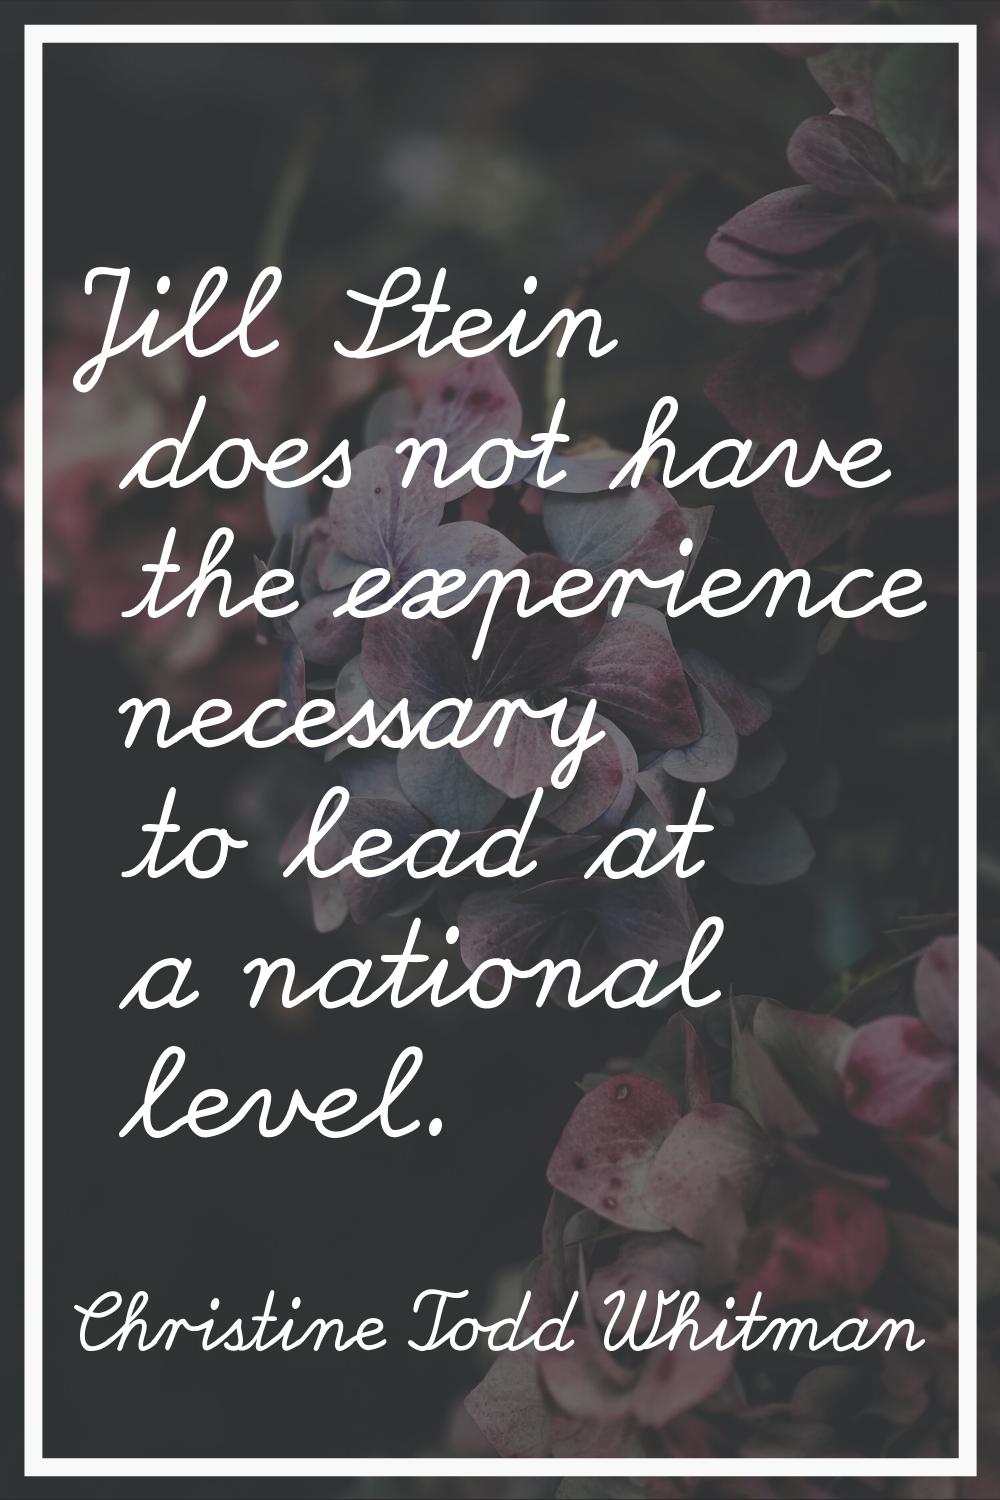 Jill Stein does not have the experience necessary to lead at a national level.